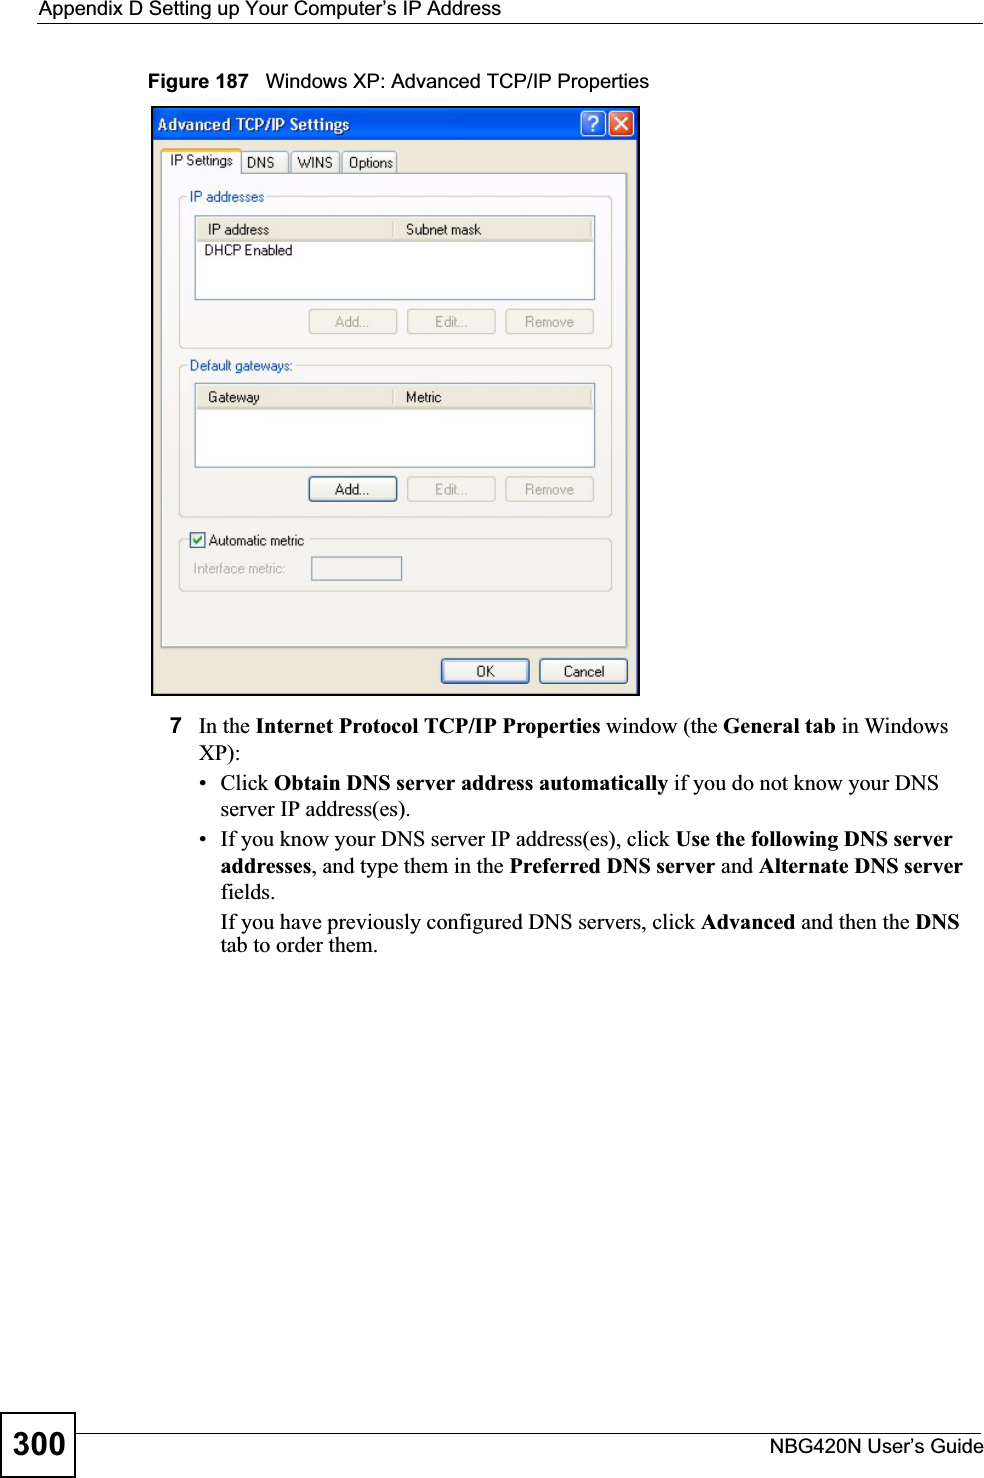 Appendix D Setting up Your Computer’s IP AddressNBG420N User’s Guide300Figure 187   Windows XP: Advanced TCP/IP Properties7In the Internet Protocol TCP/IP Properties window (the General tab in Windows XP):• Click Obtain DNS server address automatically if you do not know your DNS server IP address(es).• If you know your DNS server IP address(es), click Use the following DNS server addresses, and type them in the Preferred DNS server and Alternate DNS serverfields.If you have previously configured DNS servers, click Advanced and then the DNStab to order them.